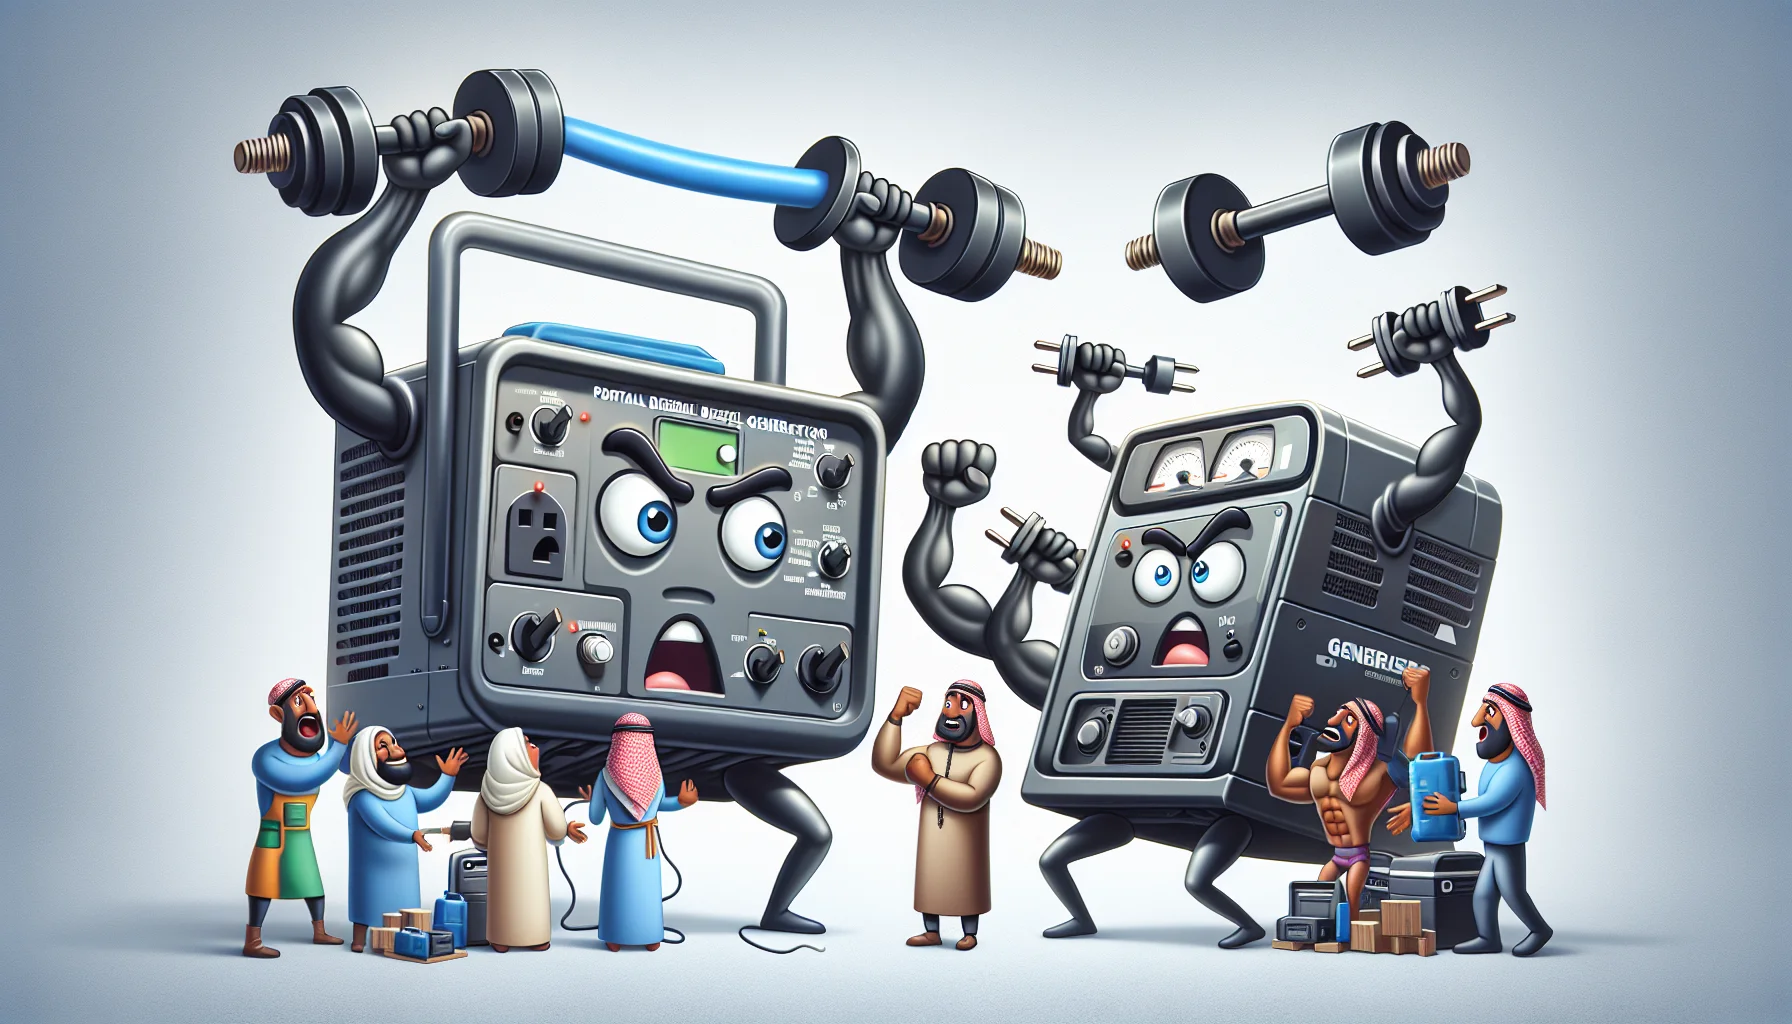 Imaginative picture of two different portable diesel generators in a hilarious situation. They're anthropomorphized with cartoon-like, expressive faces and are engaging in a friendly rivalry. One is showing off its strength by lifting weights symbolizing heavy power output, while the other boasts many plugs, symbolizing multiple power outlets. There are human observers, a woman of Middle-Eastern descent looking amazed and a man of African descent chuckling. This image intends to promote the concept of generating electricity on your own, encouraging viewers through humor.